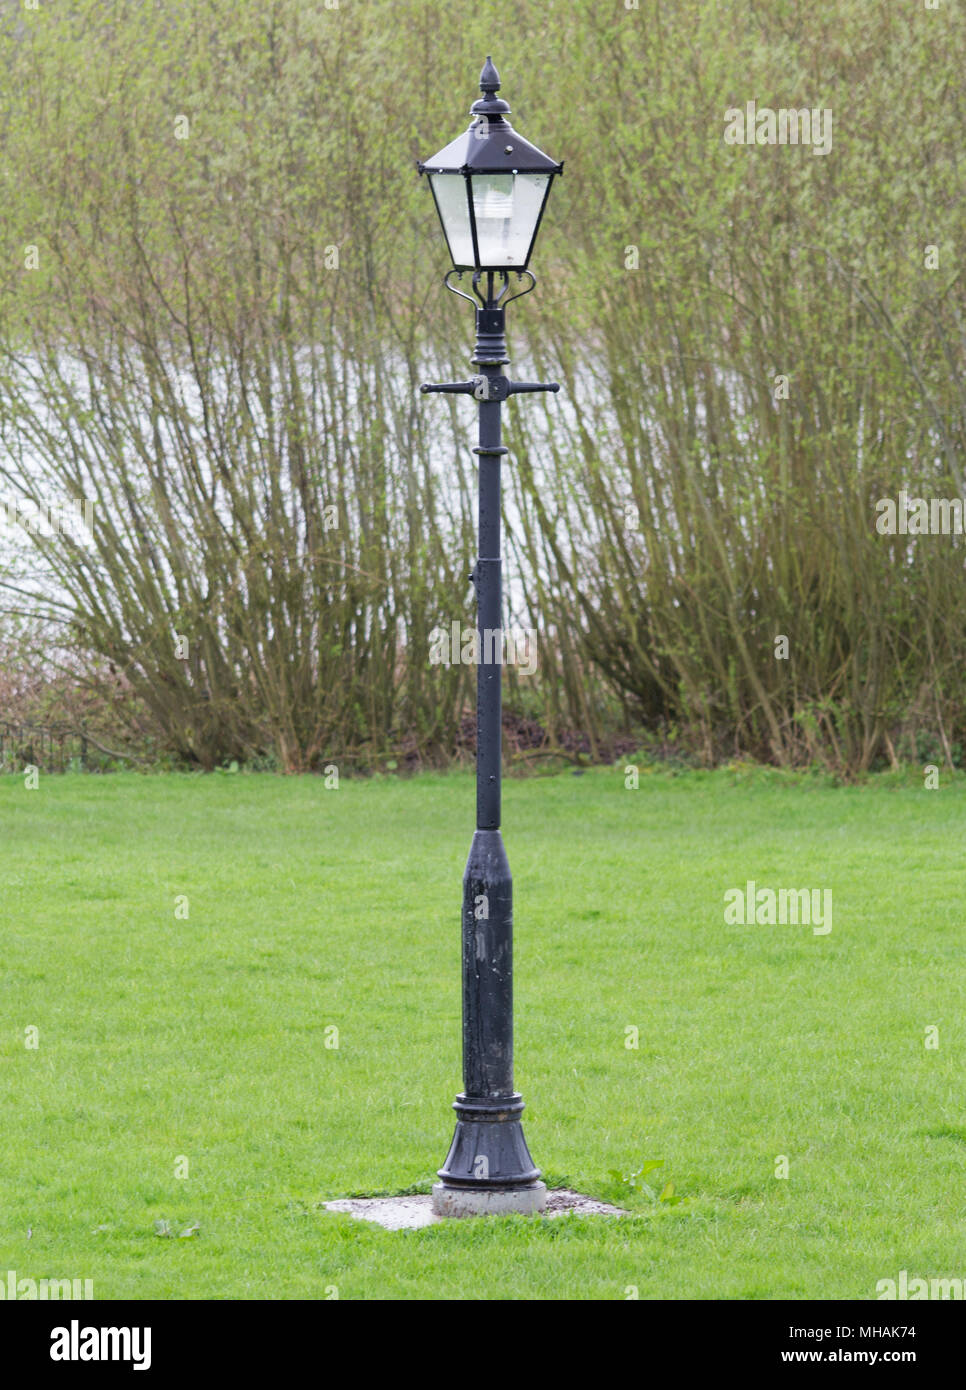 An antique lamp post in the grass nearby water Stock Photo - Alamy